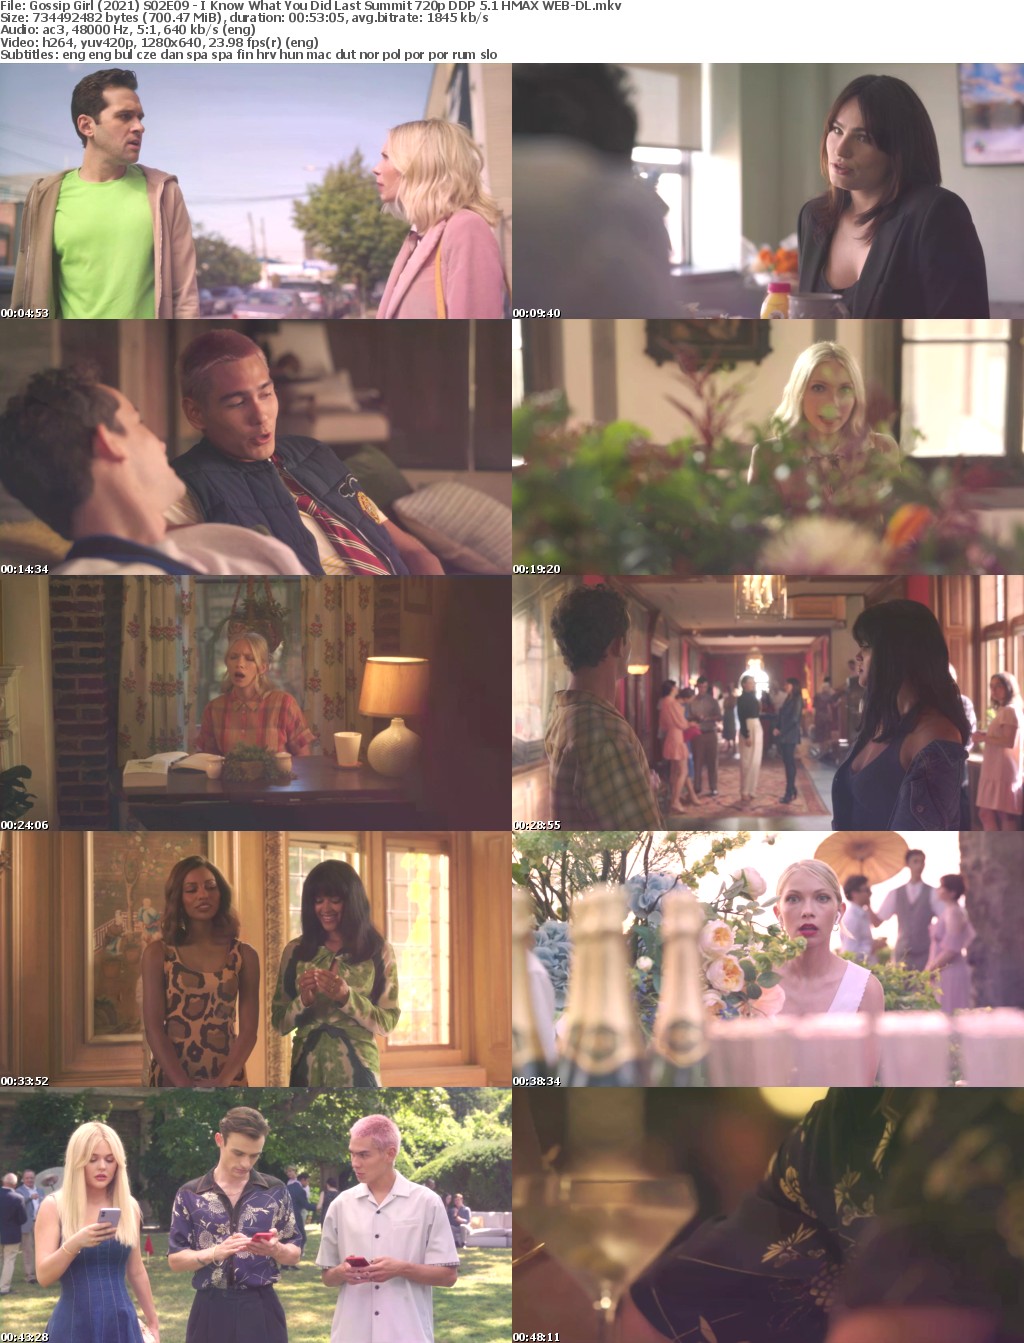 Gossip Girl (2021) S02E09 - I Know What You Did Last Summit 640p DDP 5 1 HMAX WEB-DL